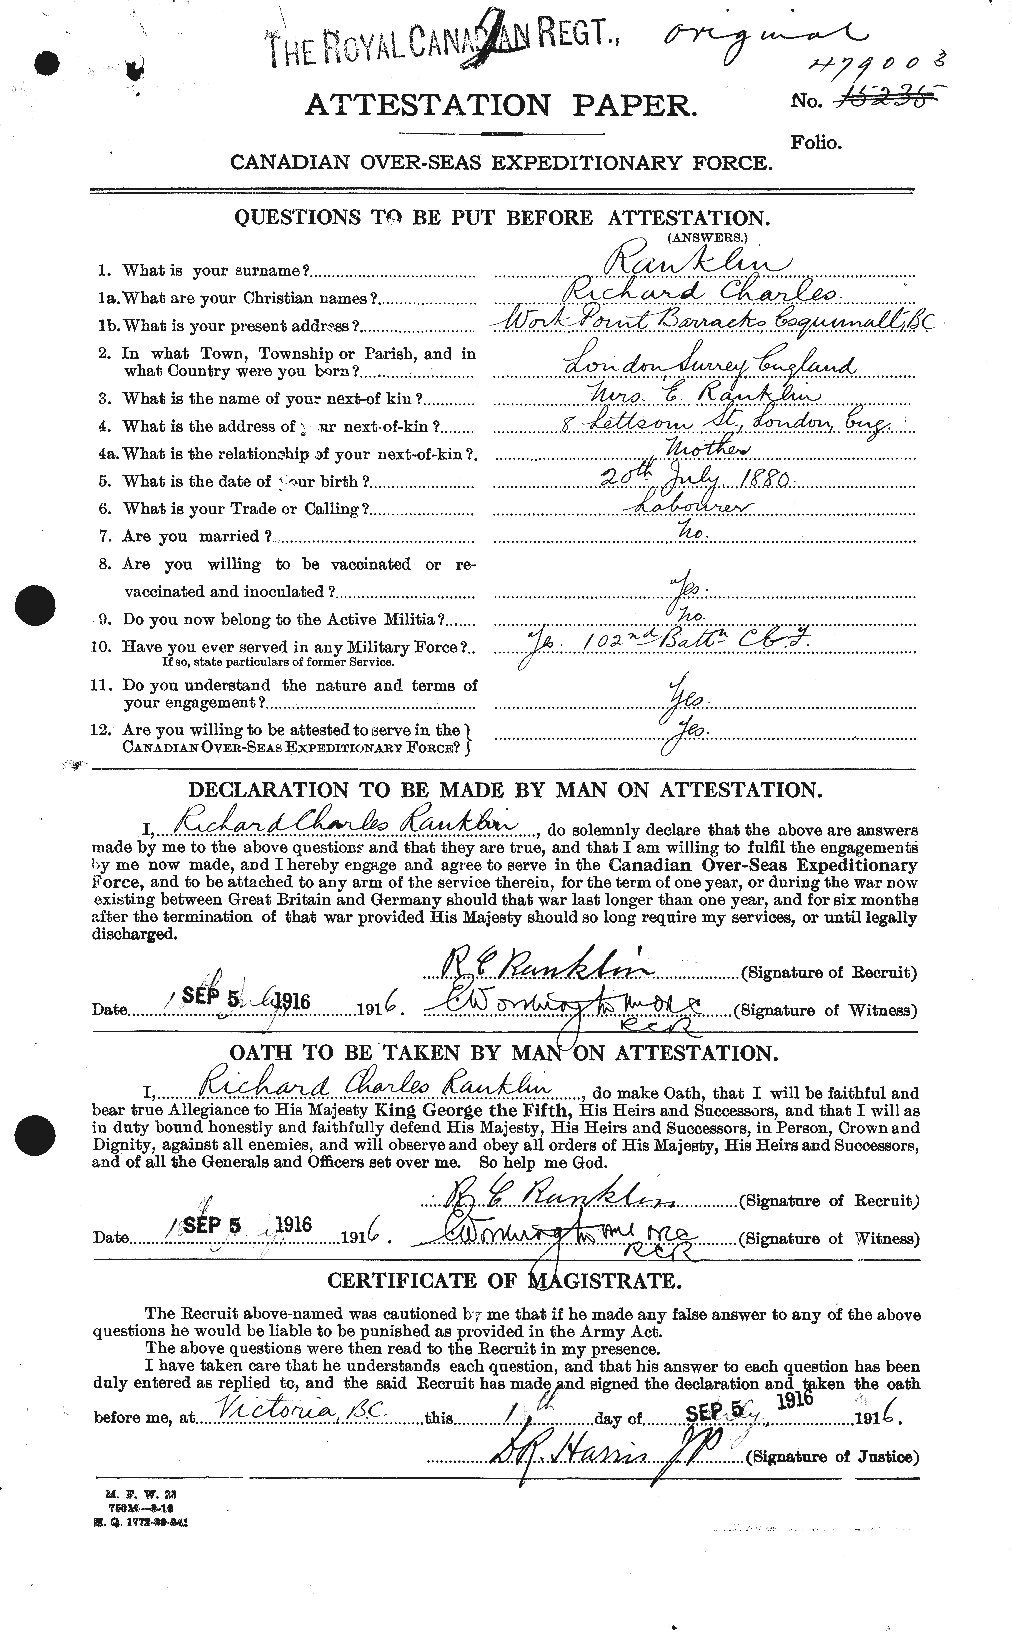 Personnel Records of the First World War - CEF 594842a